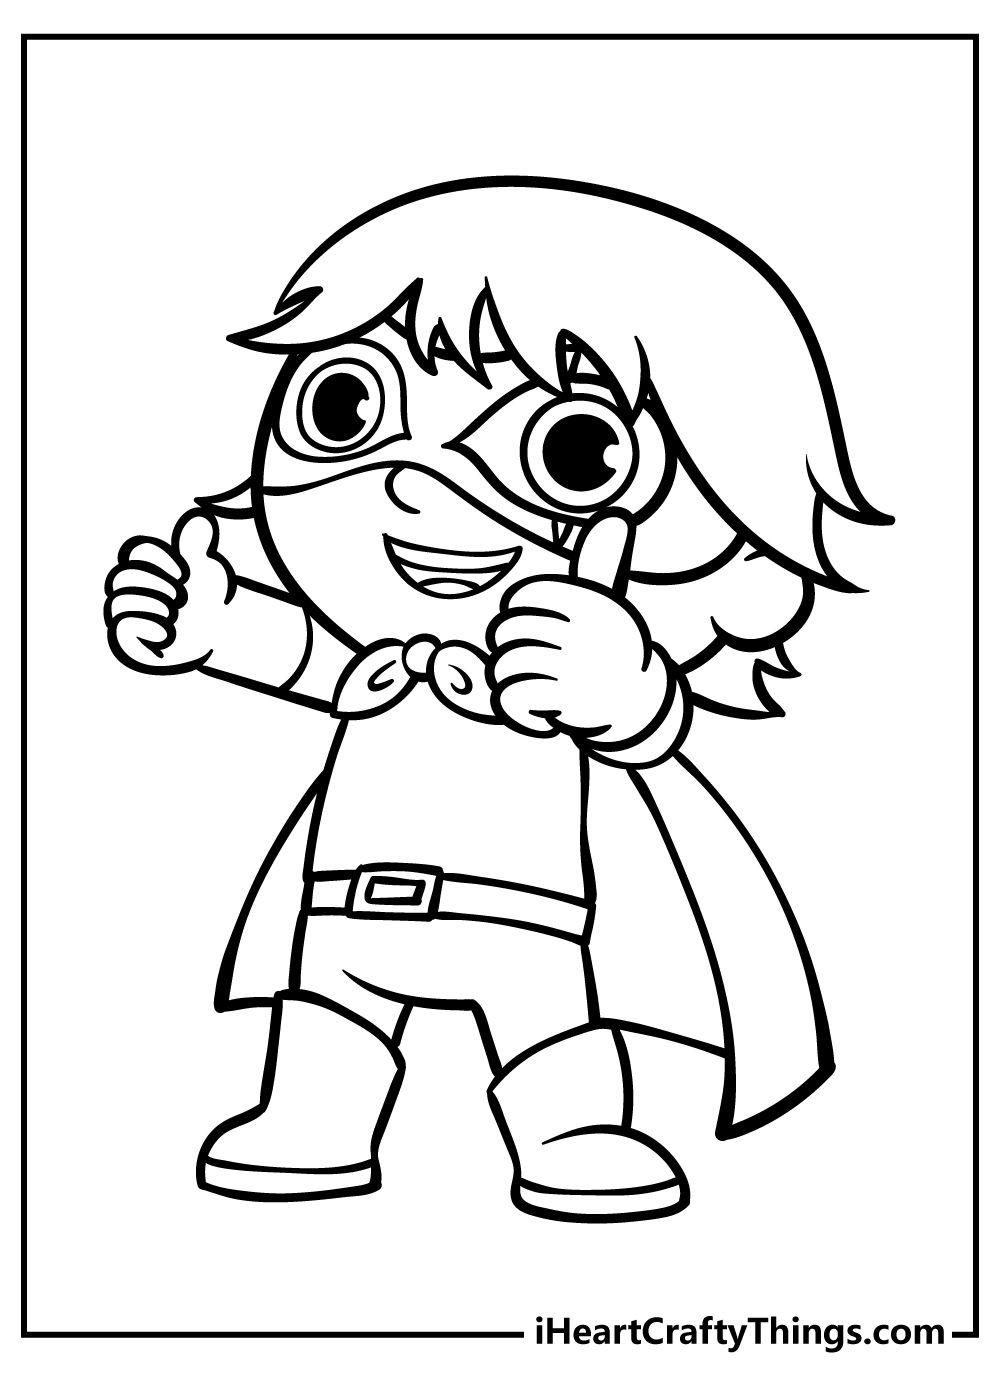 Ryan Coloring Pages for preschoolers free printable